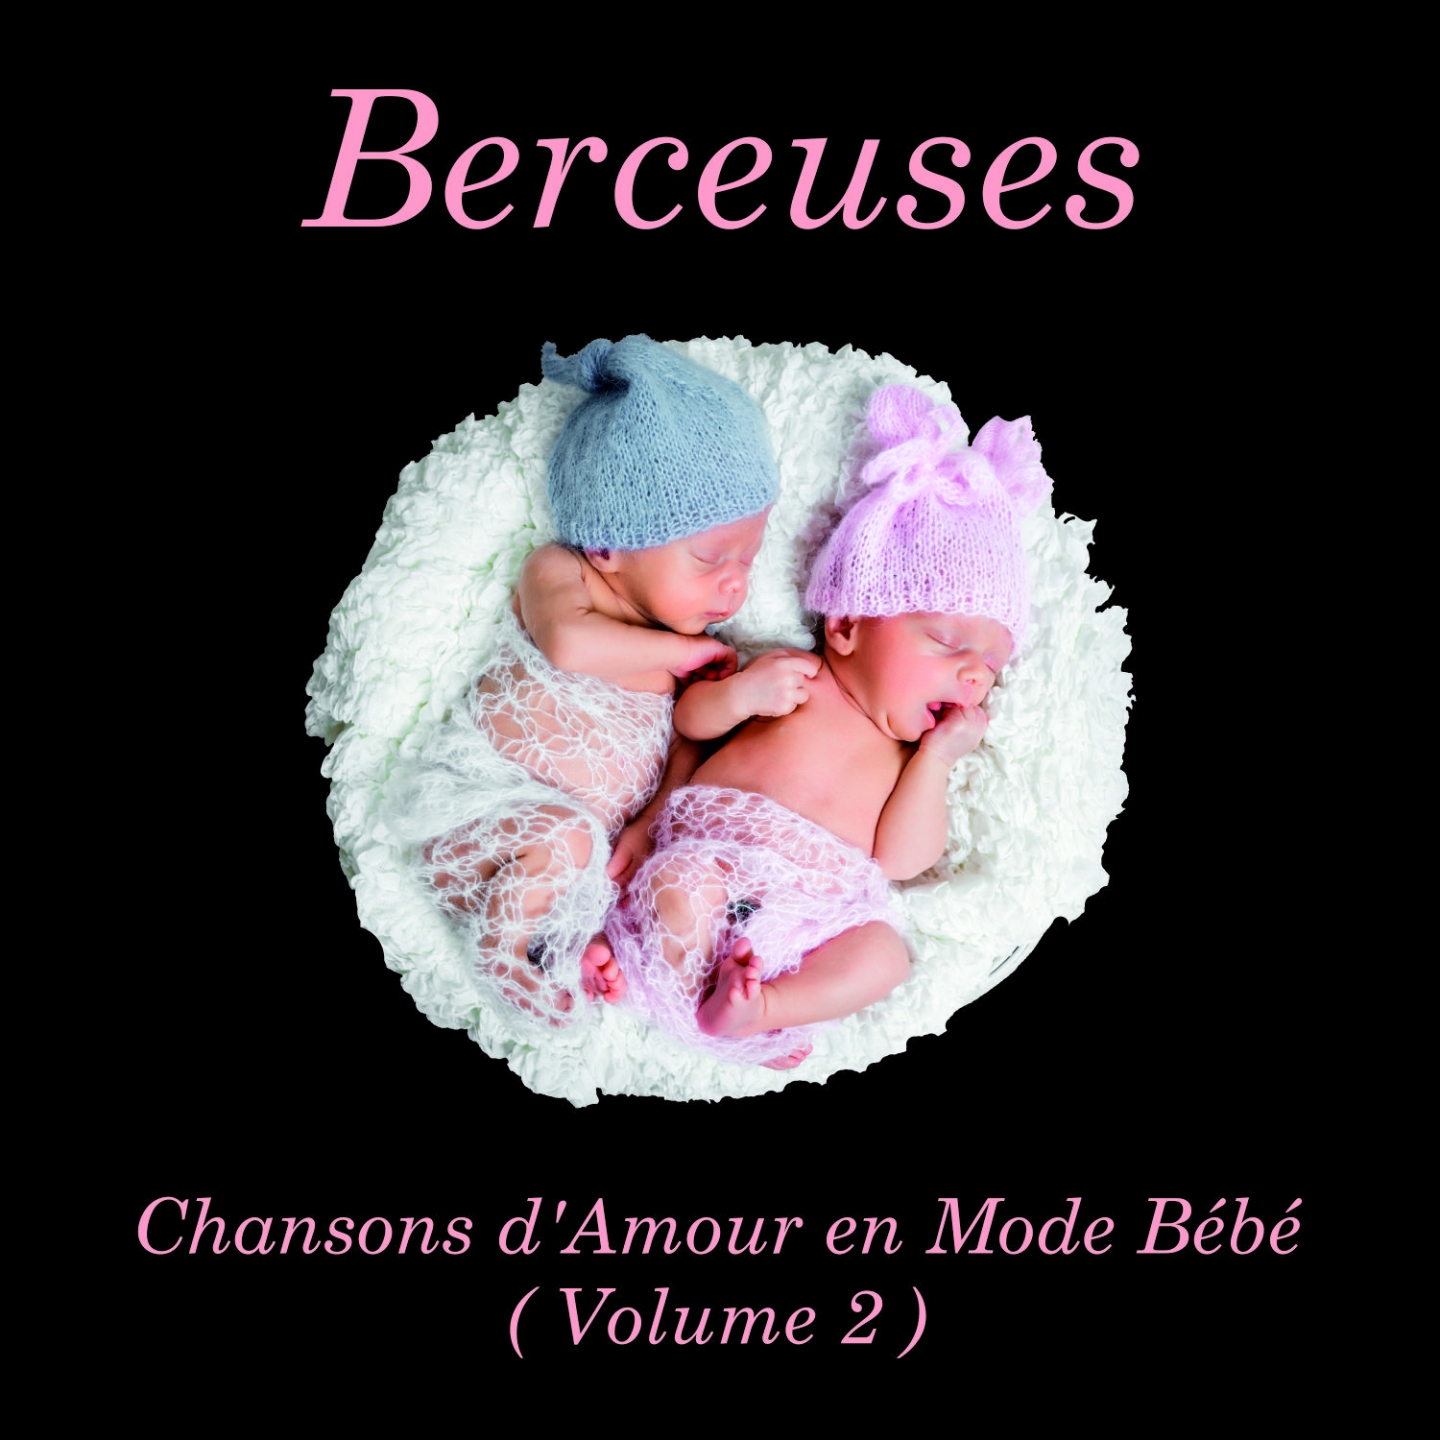 Berceuses: Chansons d' Amour en Mode Be be